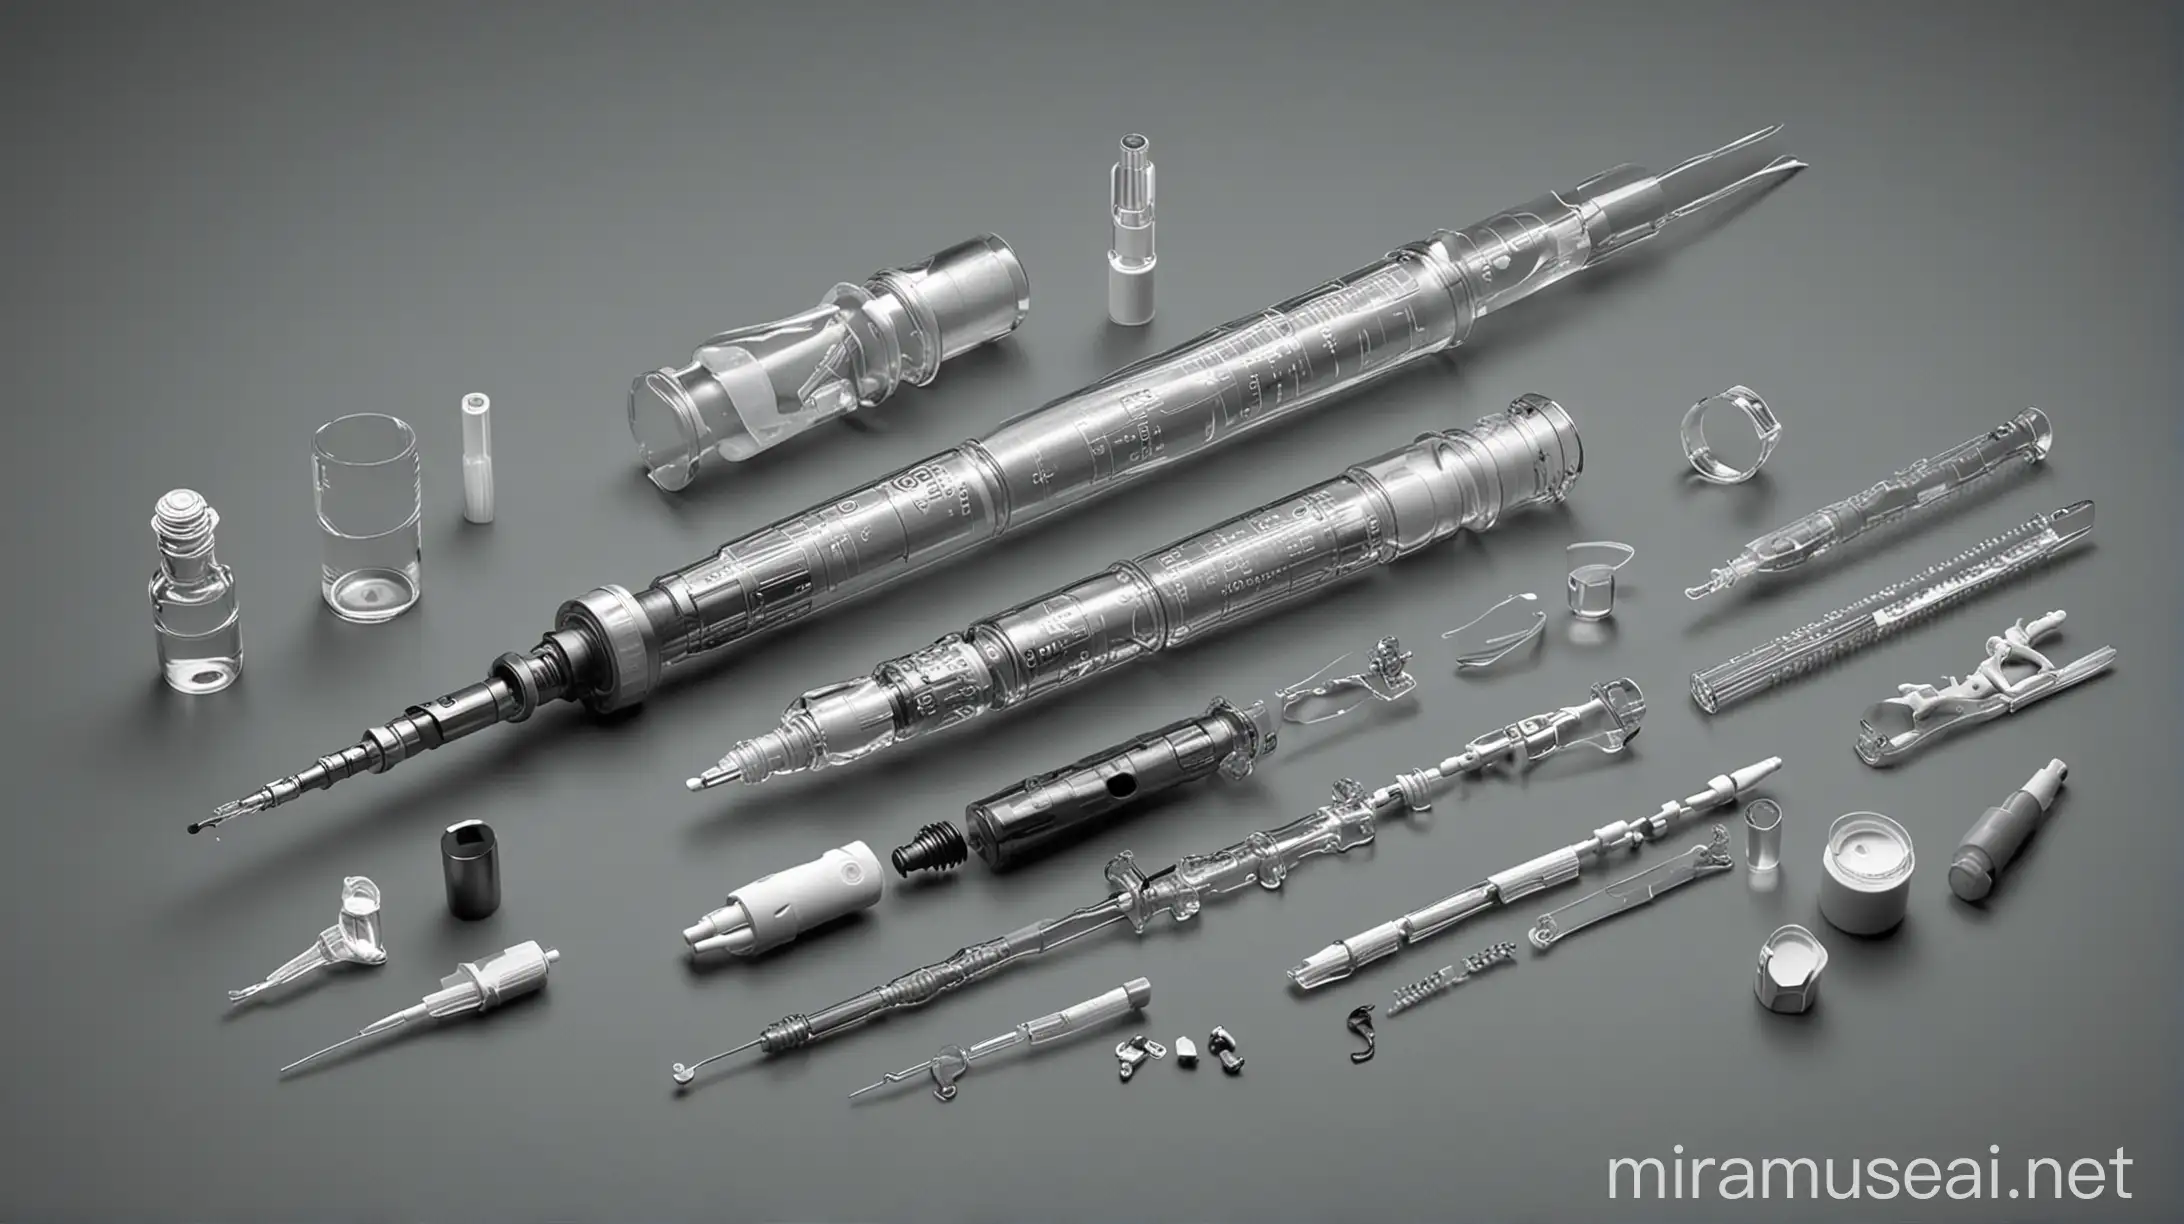 Disassembled Prefilled Syringe with Detailed Parts Separation